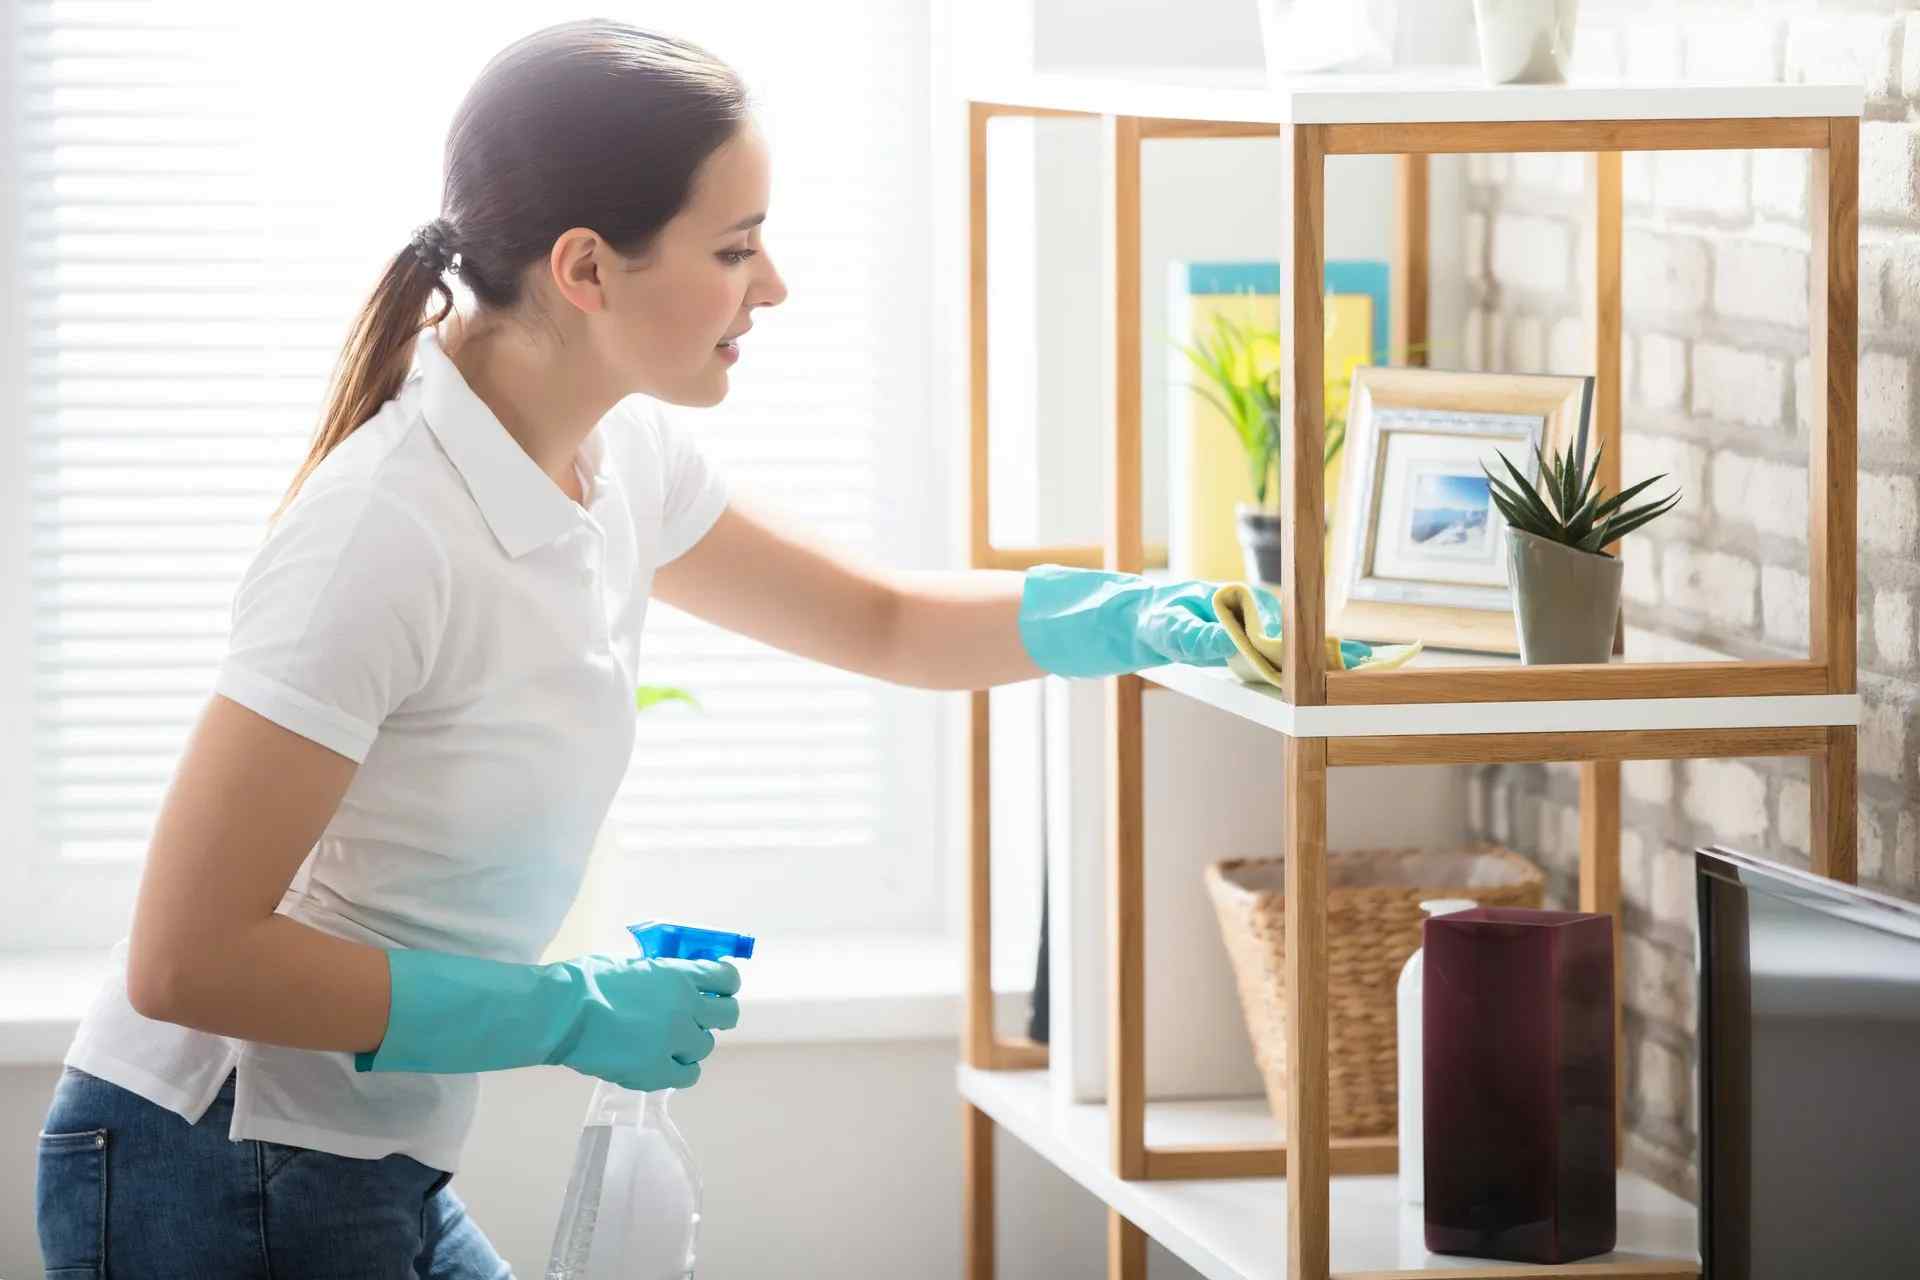 Home Cleaning Services- Key And Clean